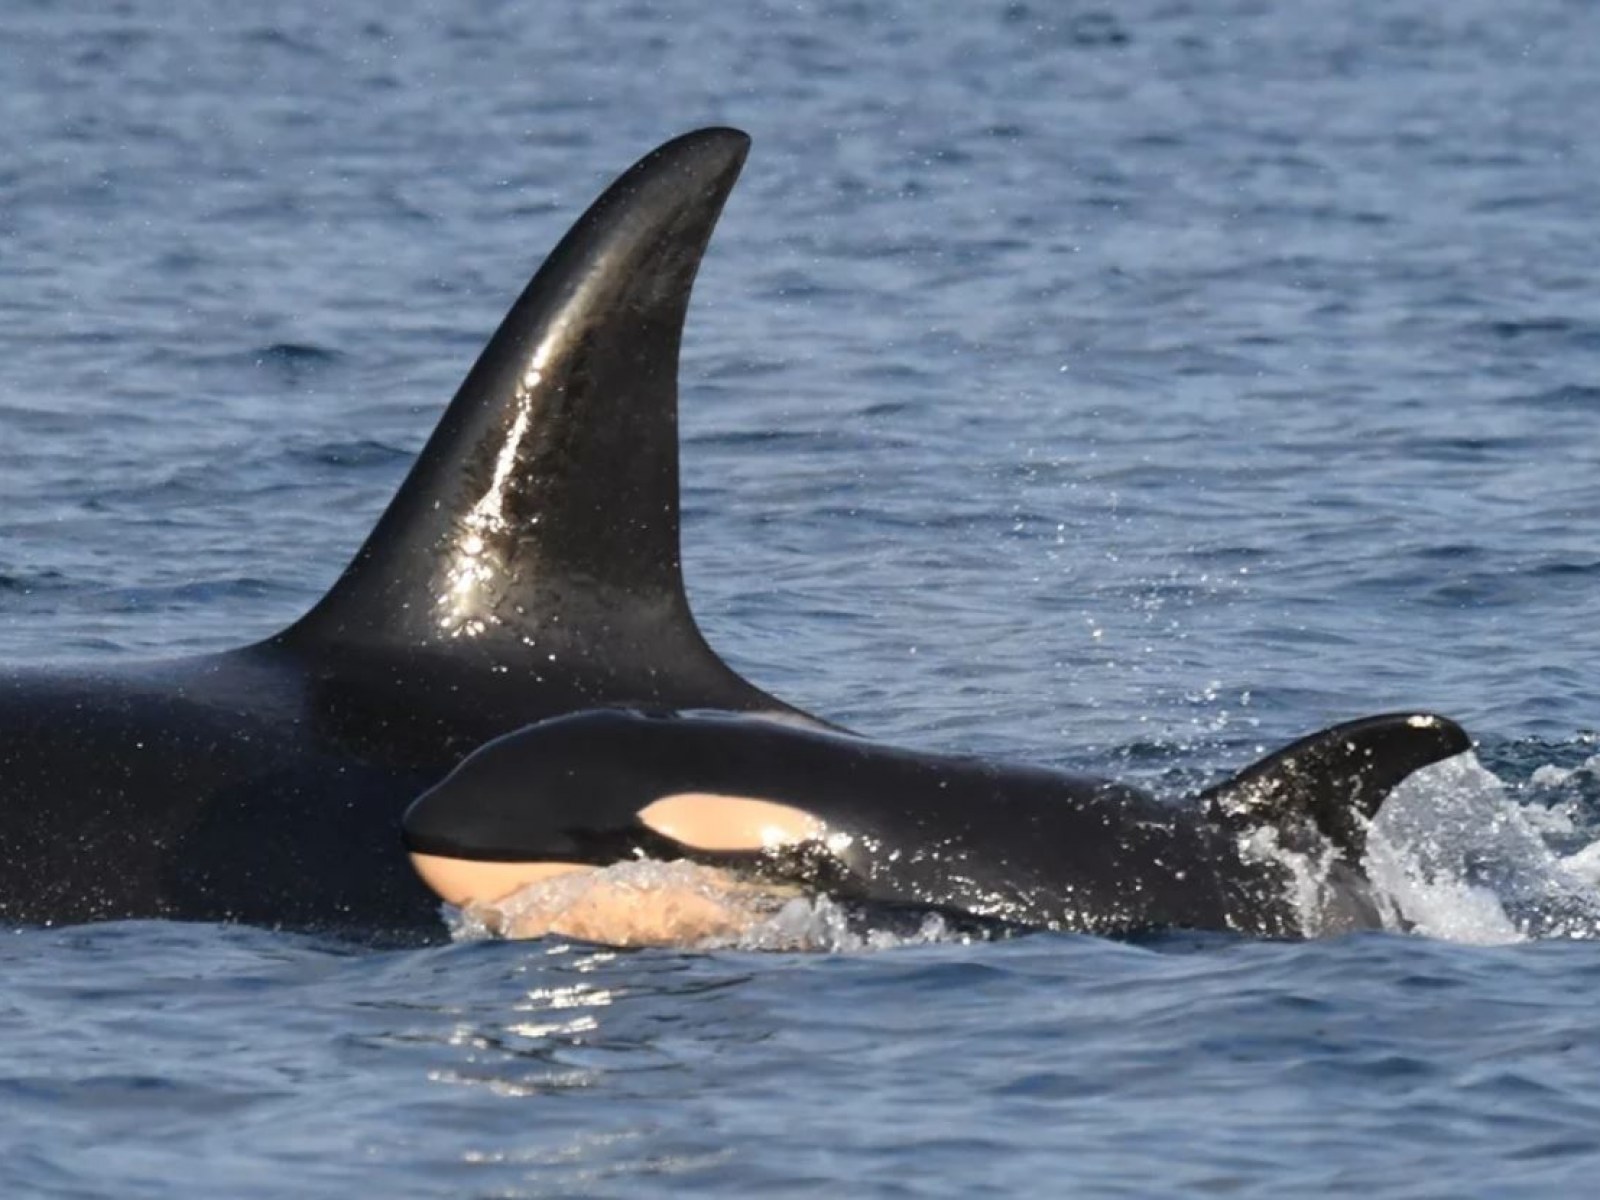 Adorable pictures show an endangered baby orca just days old swimming next to mom